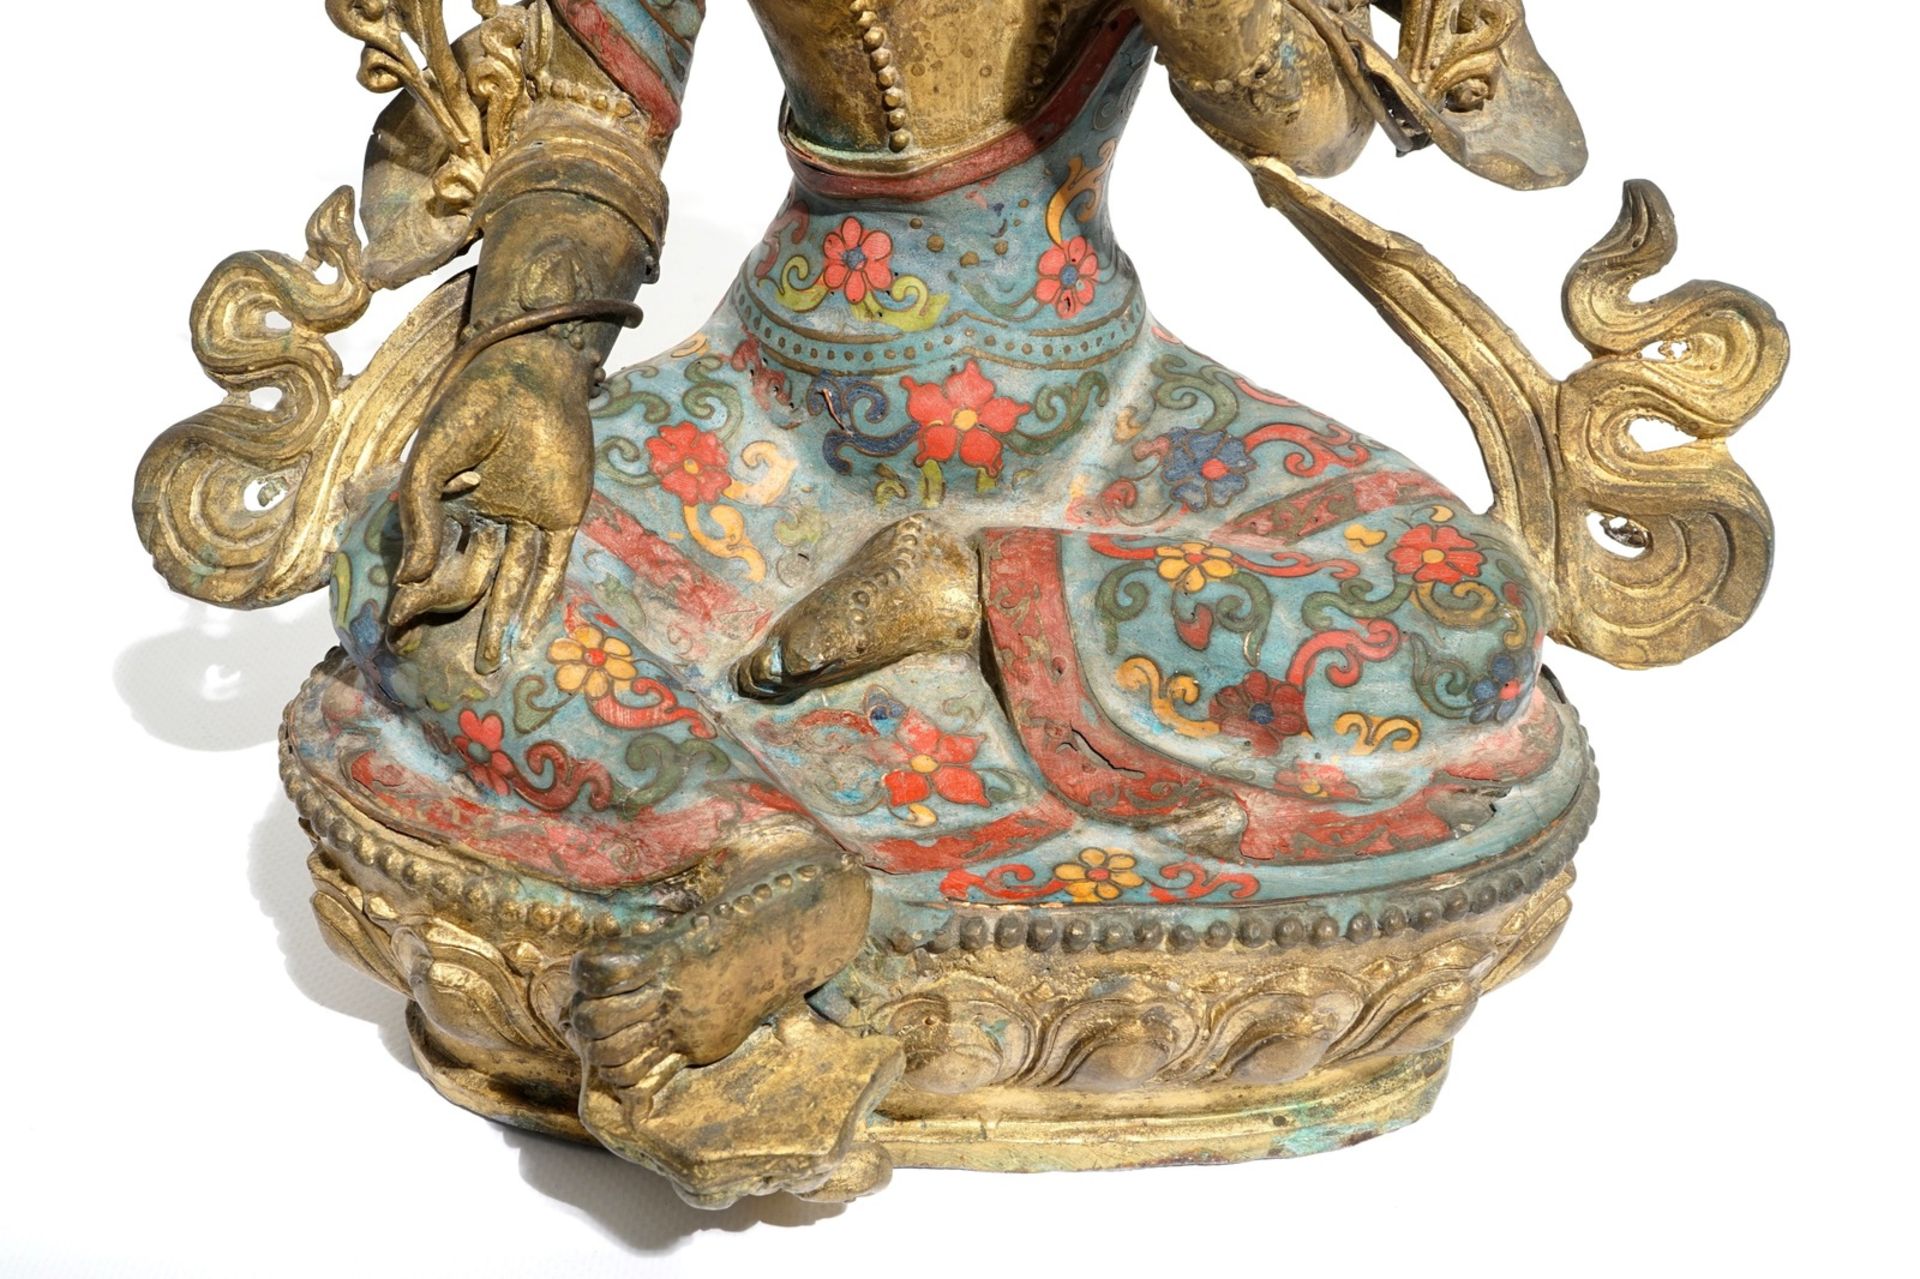 A large Chinese gilt bronze and cloisonné figure of Green Tara, 19th C. - Image 9 of 10